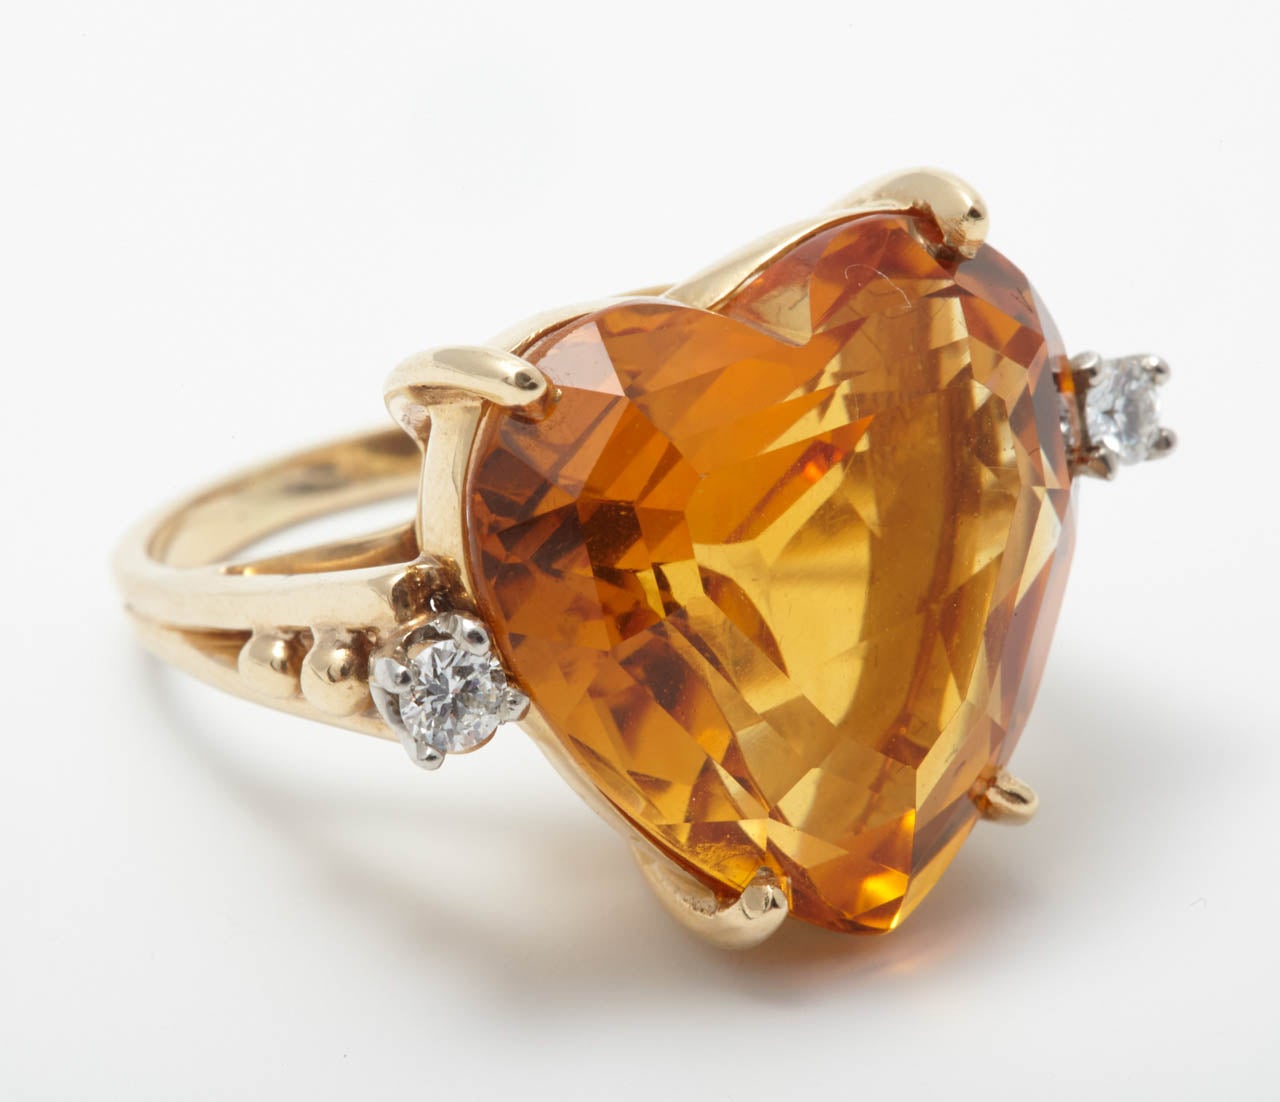 A gold, citrine and diamond dress ring, by Tiffany & Co.
Claw-set with a heart-shaped citrine flanked by a brilliant-cut diamond, weighing approximately 0.15 cts, and bead decoration to the shoulders. 
Engraved Tiffany & Co. Ring sizze is 7 1/4 /